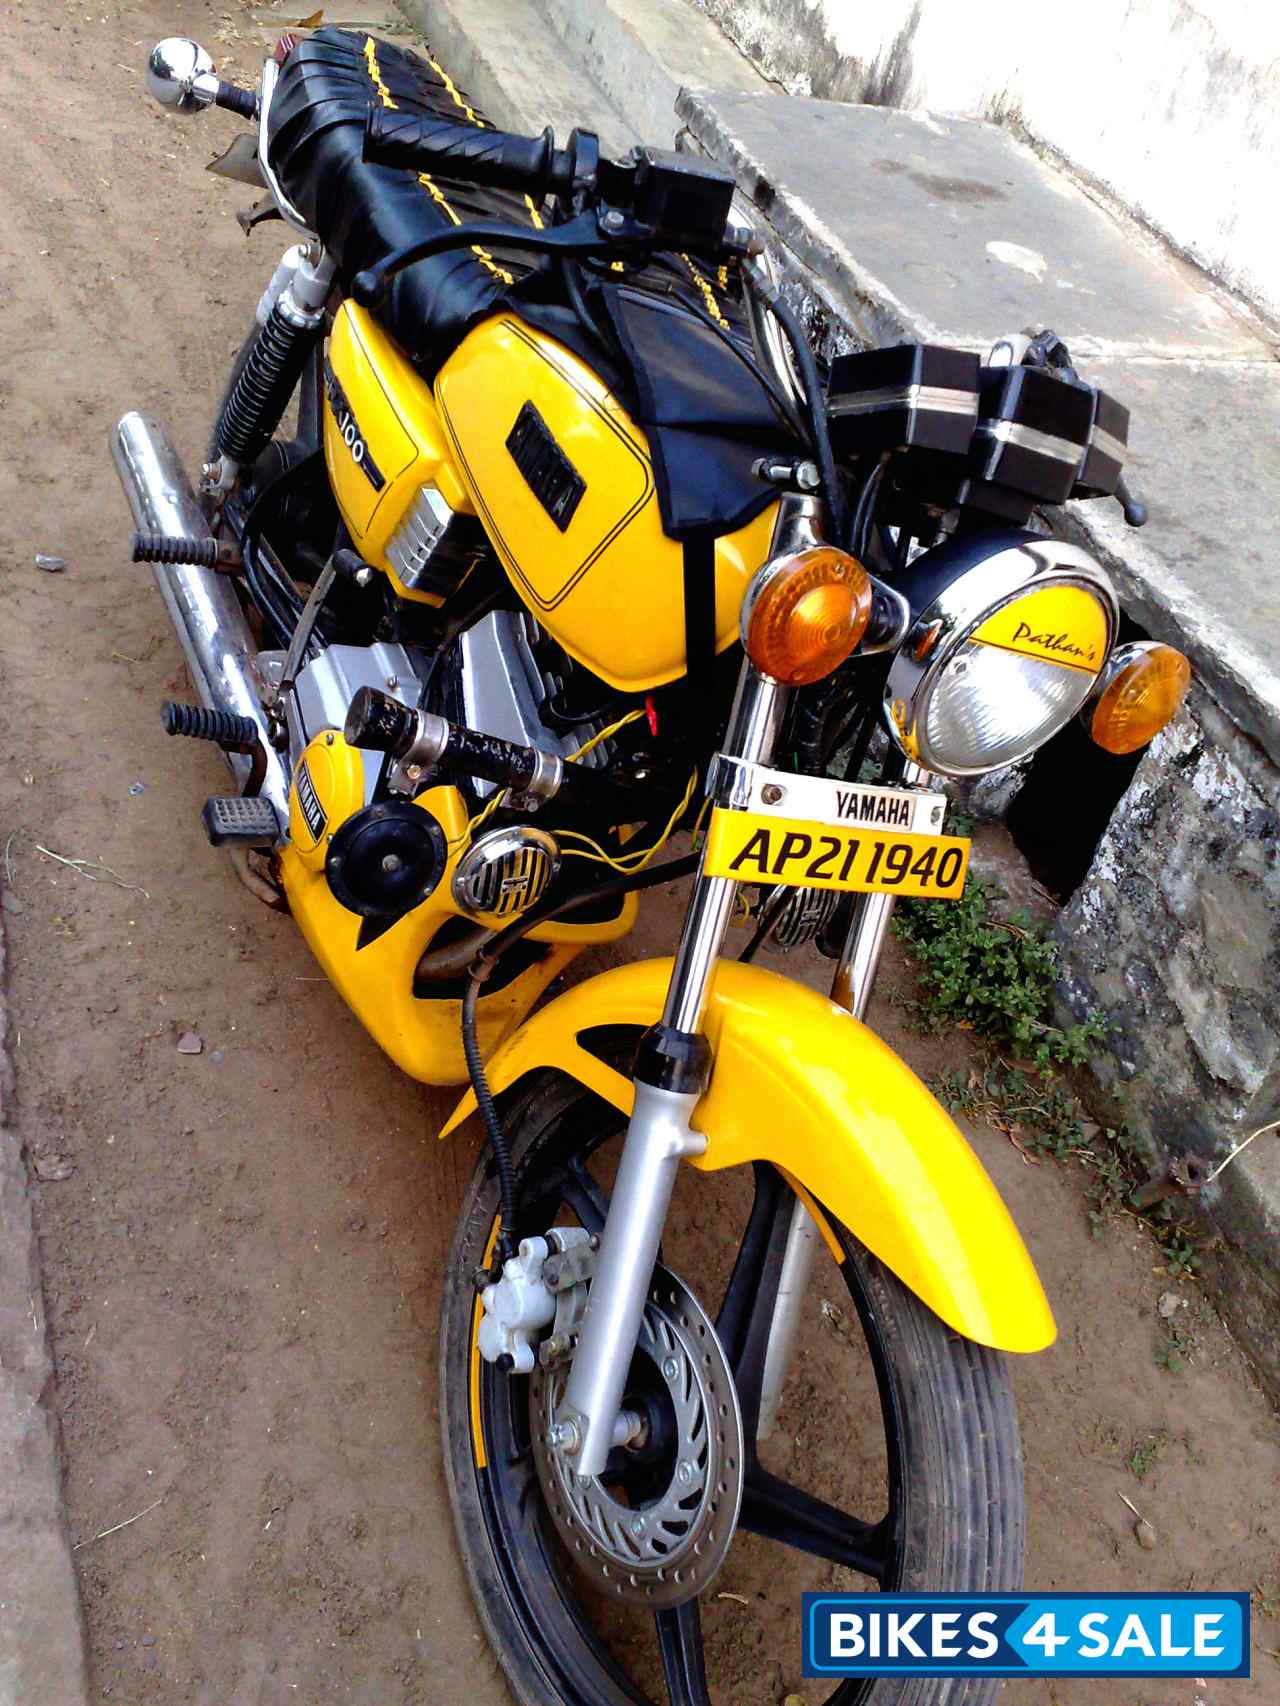 Used 19 Model Yamaha Rx 100 For Sale In Guntur Id Yellow Colour Bikes4sale